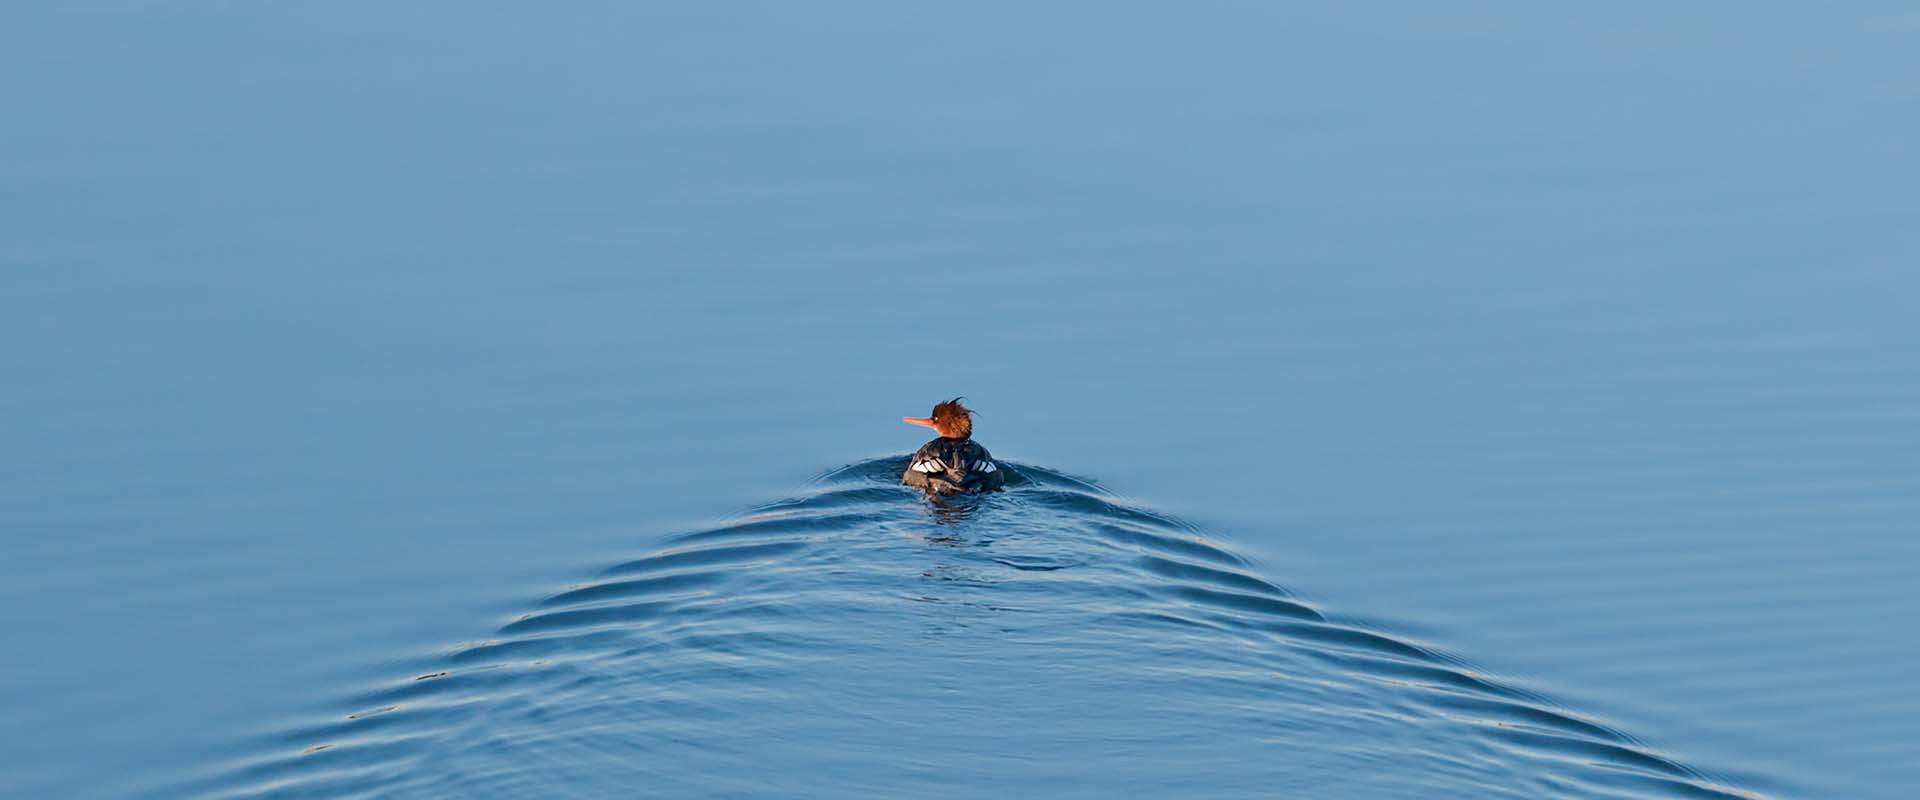 A merganser floats through calm bue waters leaving a v-shaped wake behind it.